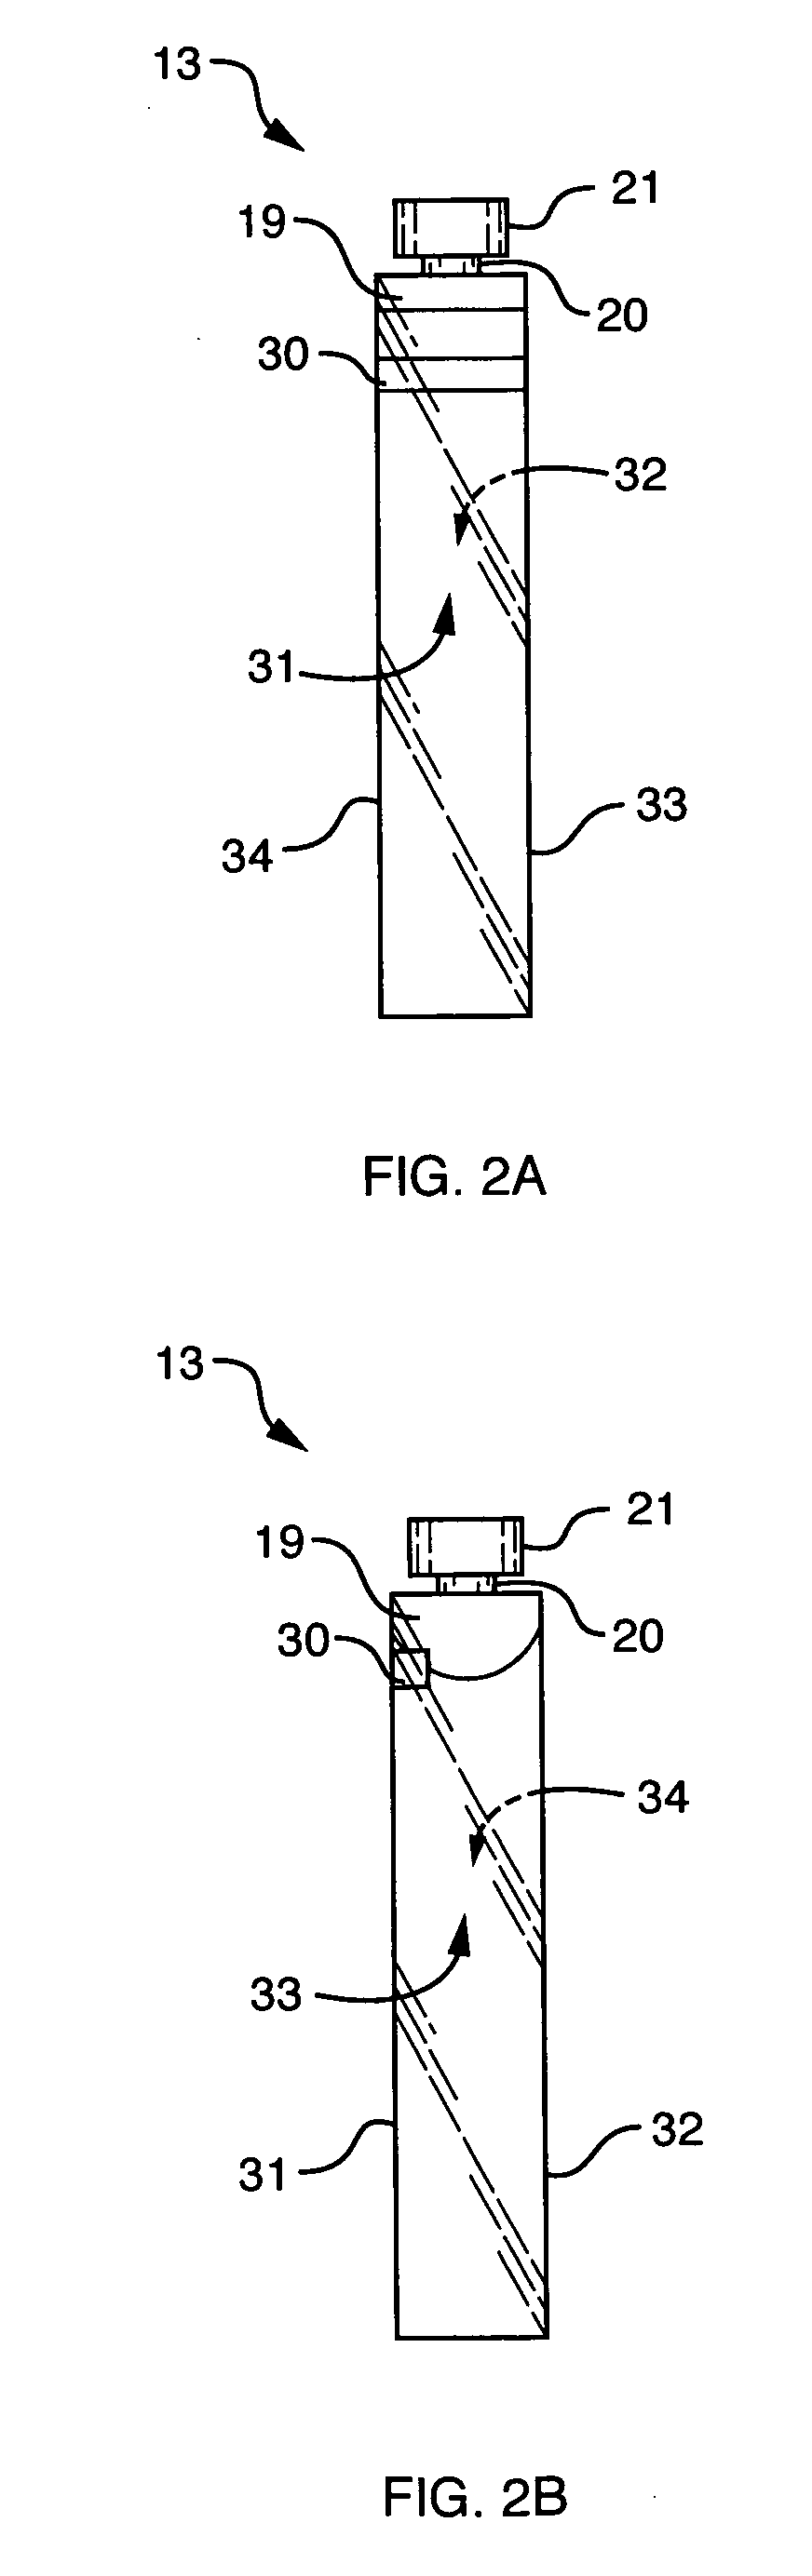 Apparatus and method for calibration of spectrophotometers